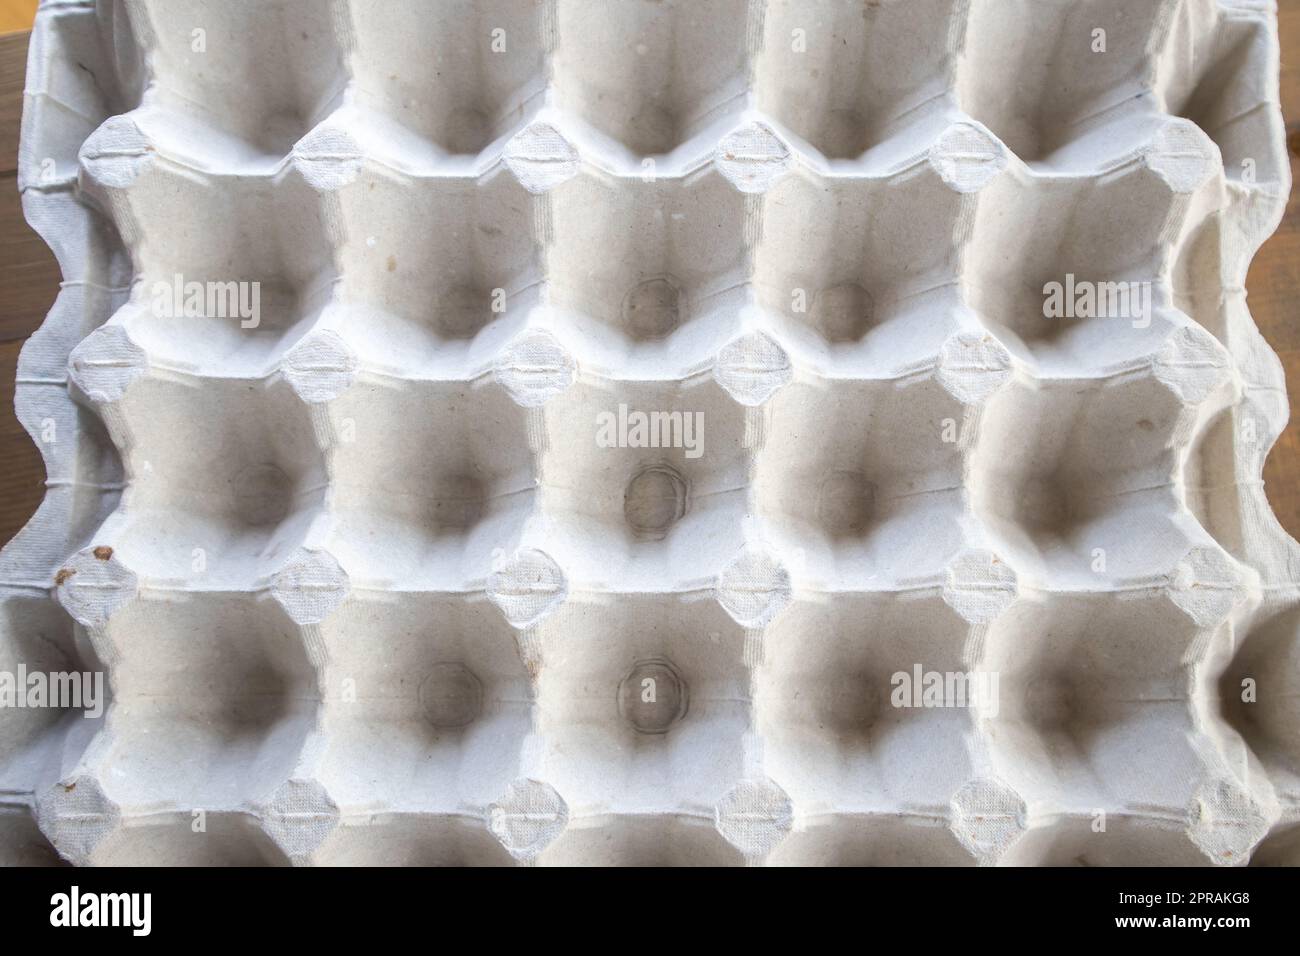 Top view of an empty cardboard egg tray. Background texture of a container made of biodegradable paper packaging with a repeating pattern Stock Photo